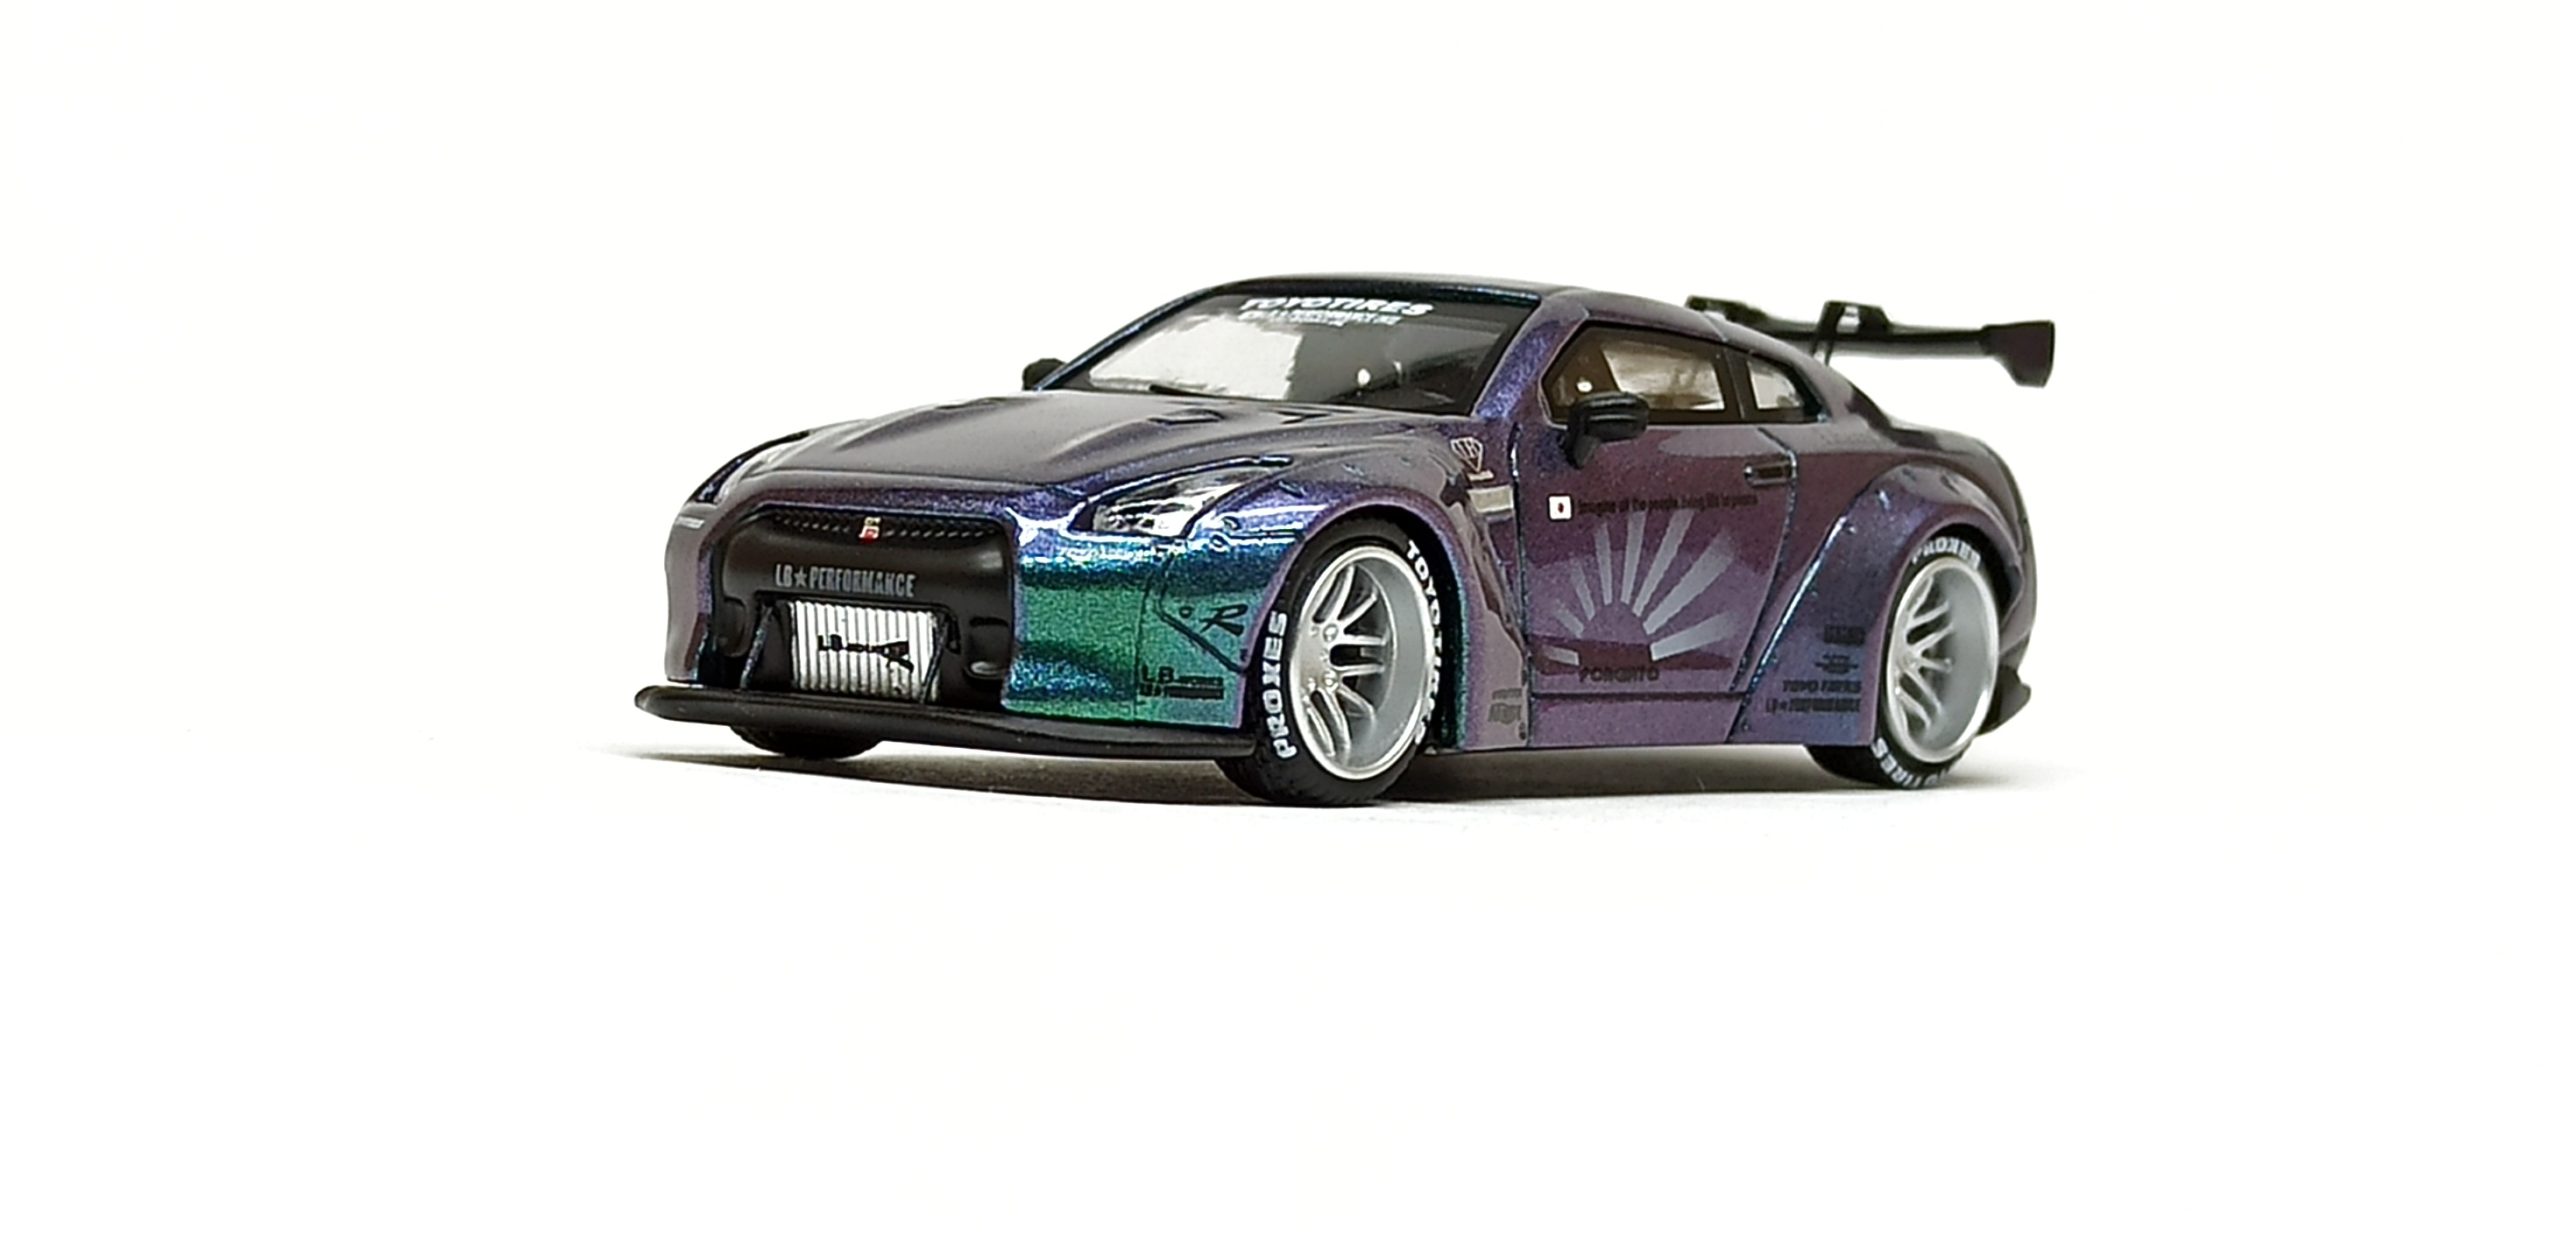 Nissan GT-R (R35) Time Micro / Time Model: LB Performance Liberty Walk (high wing) chameleon